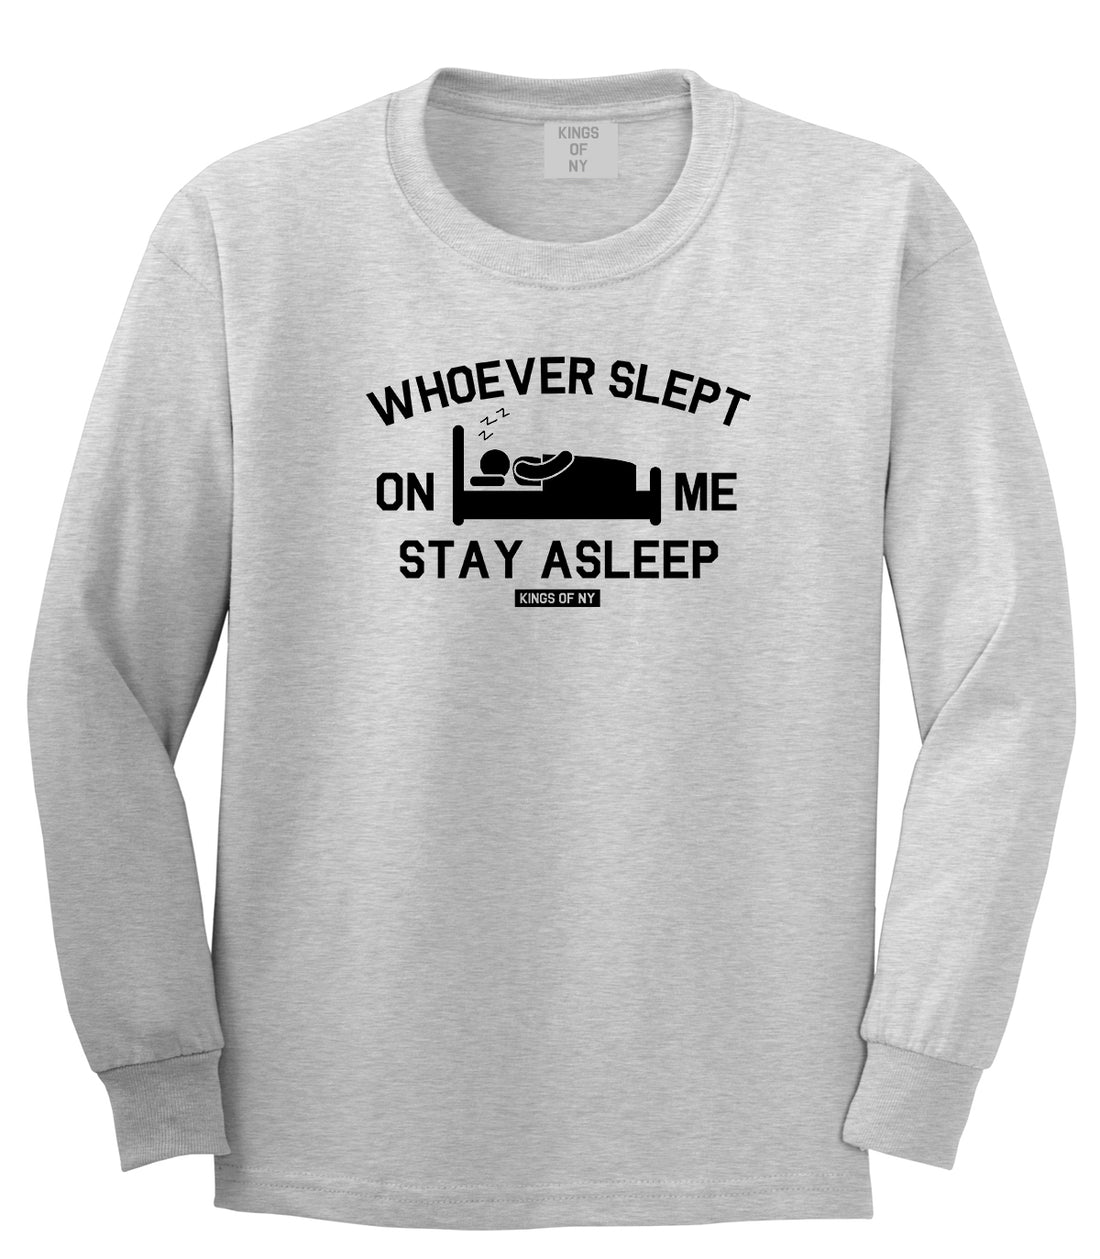 Whoever Slept On Me Stay Asleep Mens Long Sleeve T-Shirt Grey by Kings Of NY